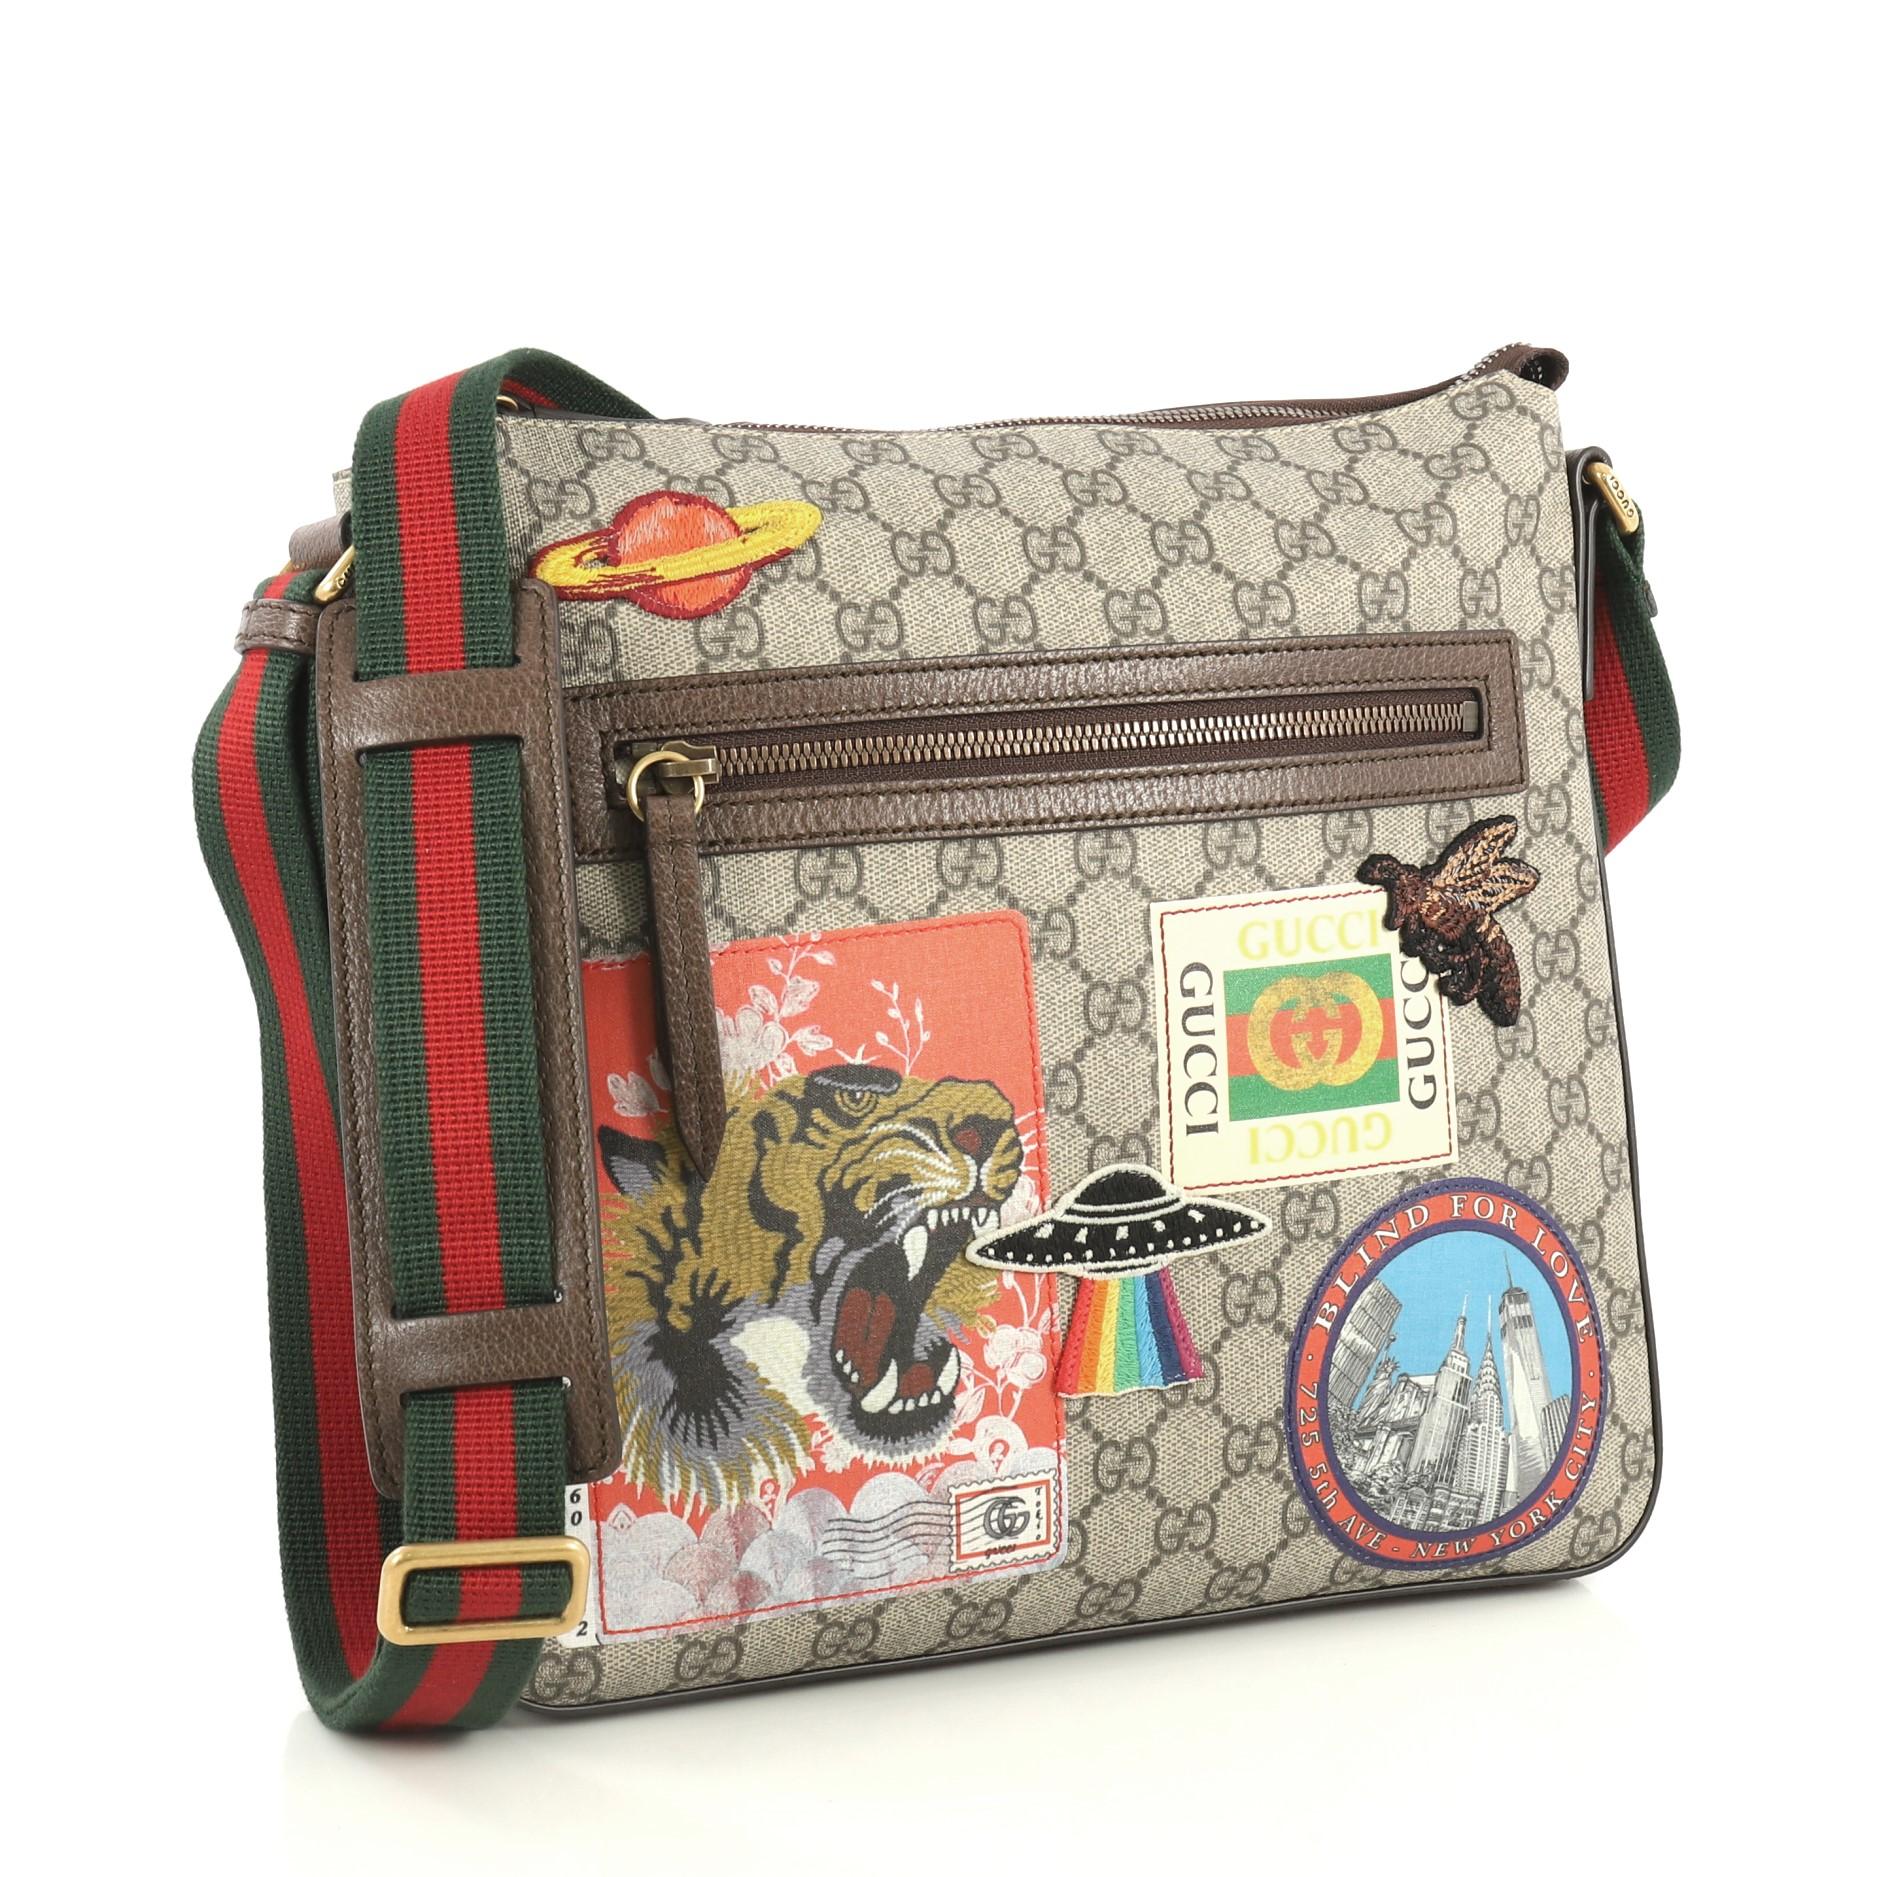 Courrier Messenger Coated Canvas with Applique at 1stDibs